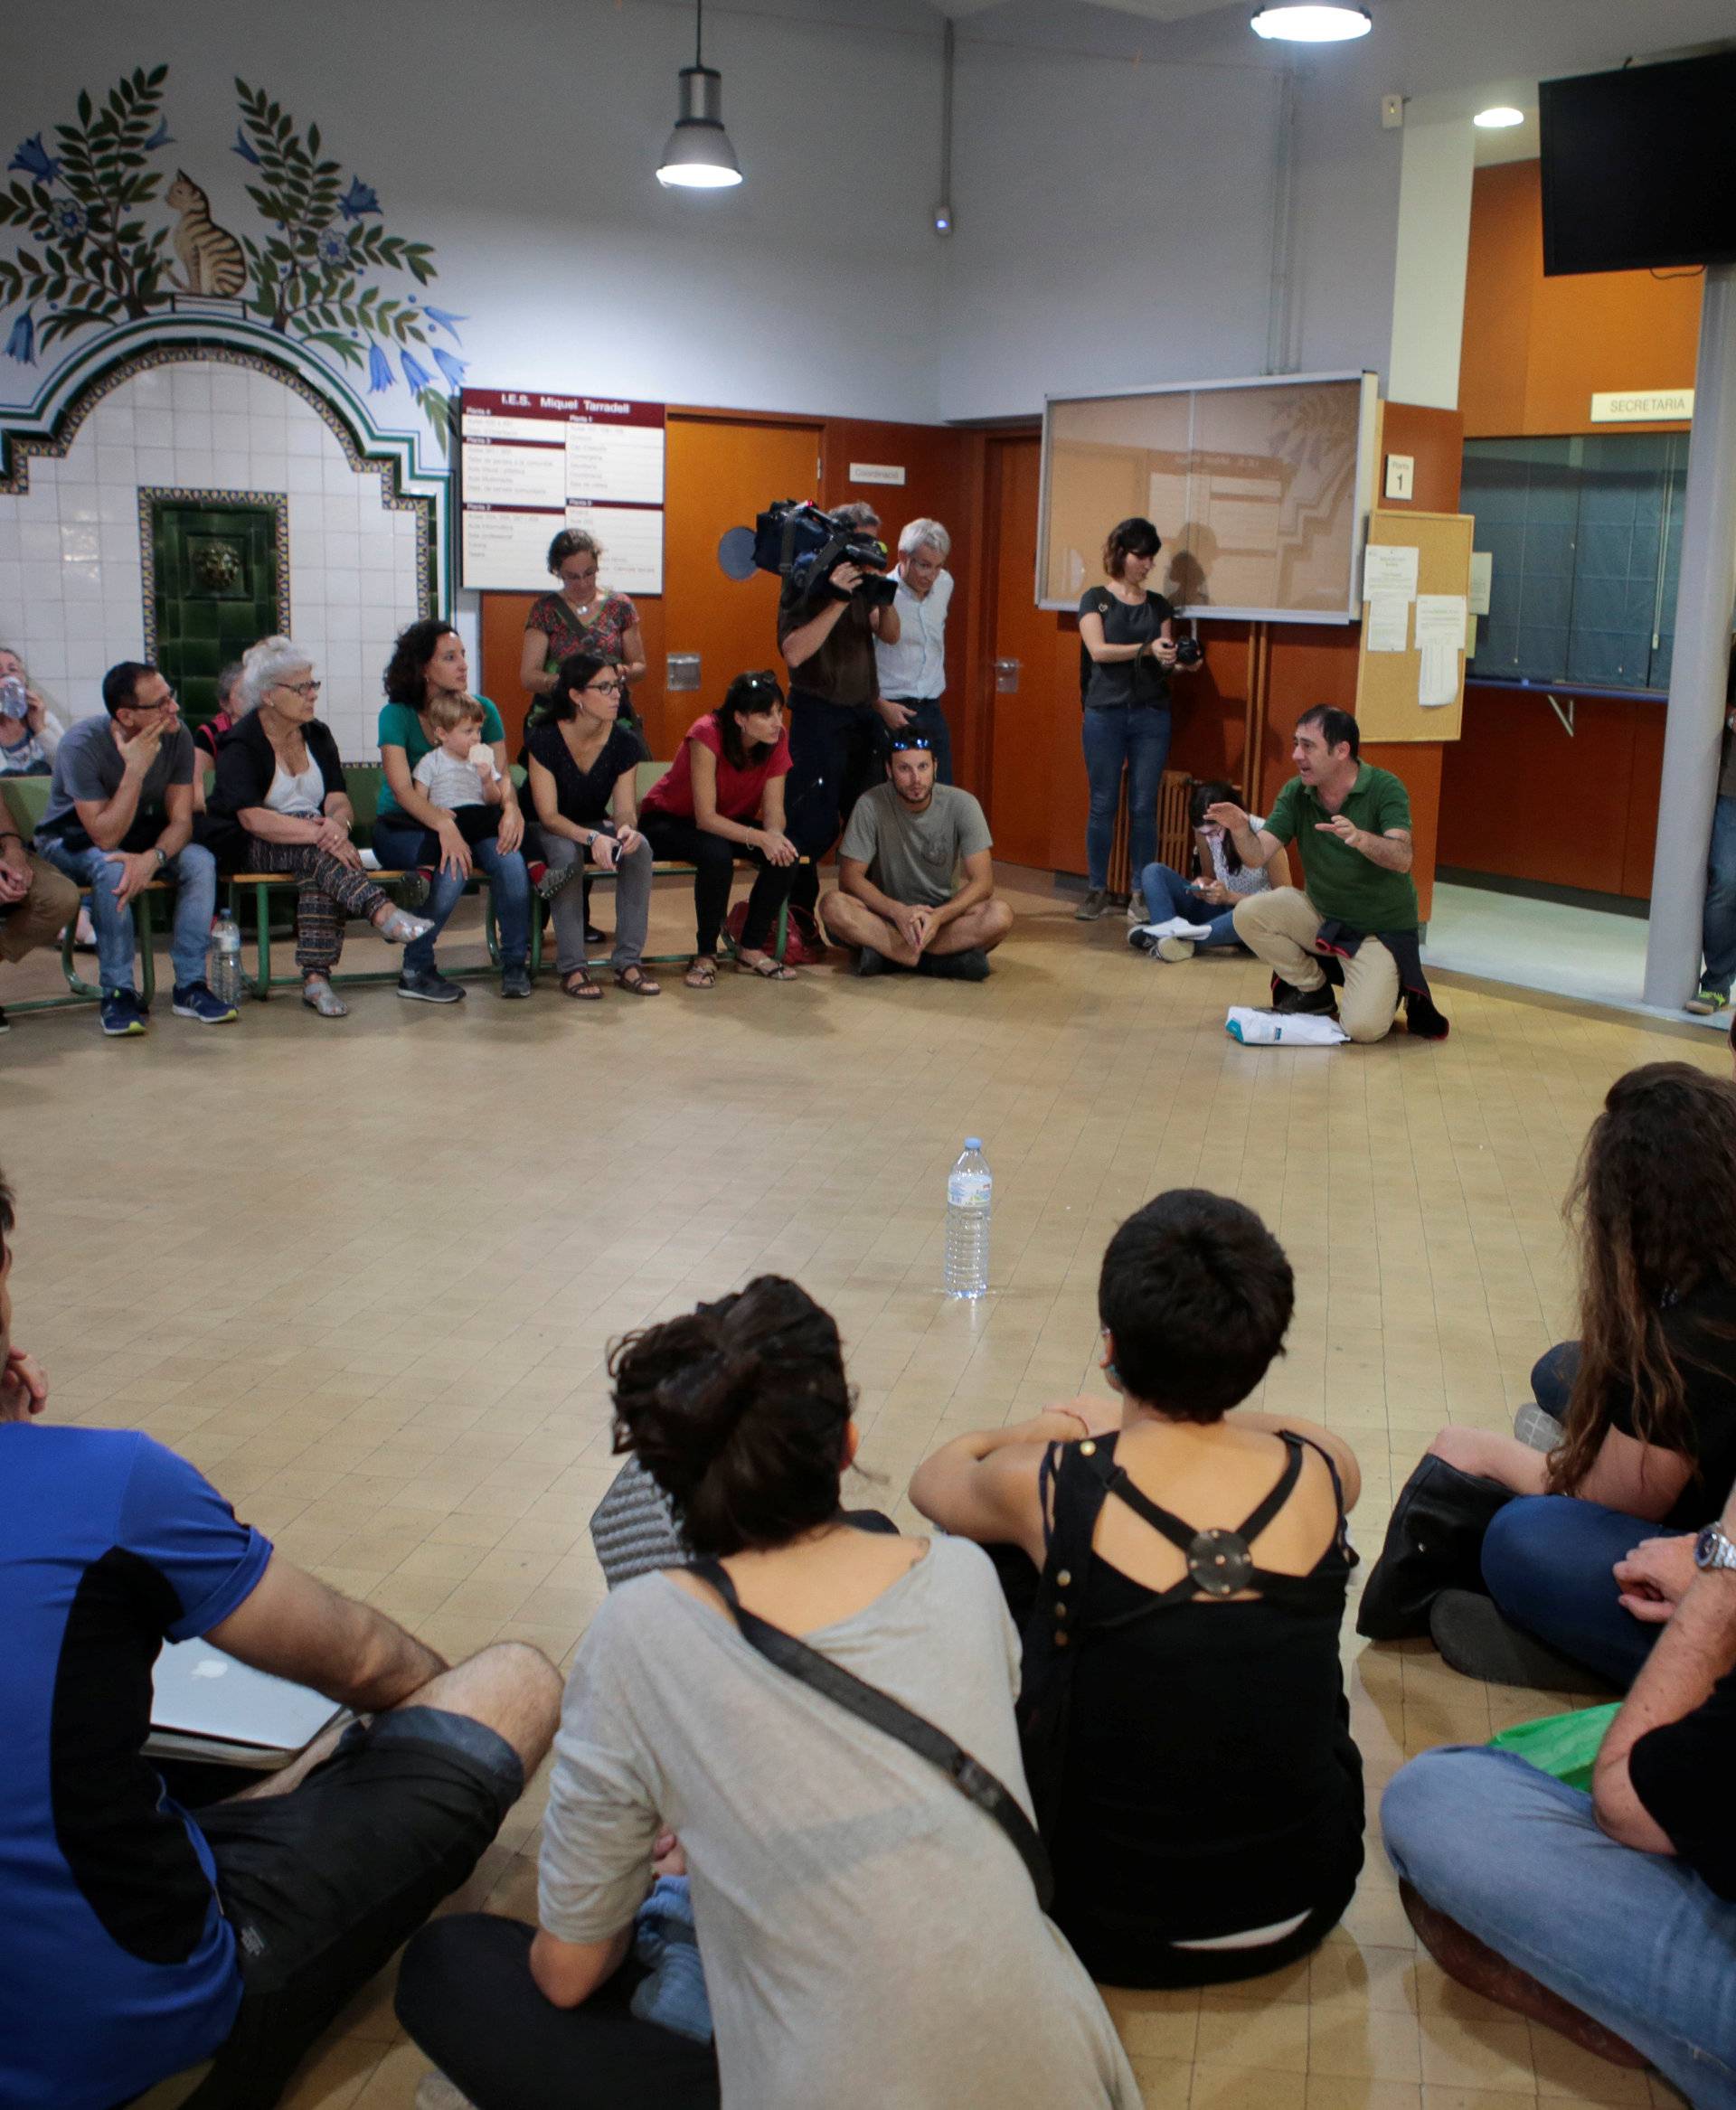 People gather in the Miquel Tarradell high school, one of the designated polling stations, to occupy the premises in a bid to permit voting in the banned independence referendum in Barcelona